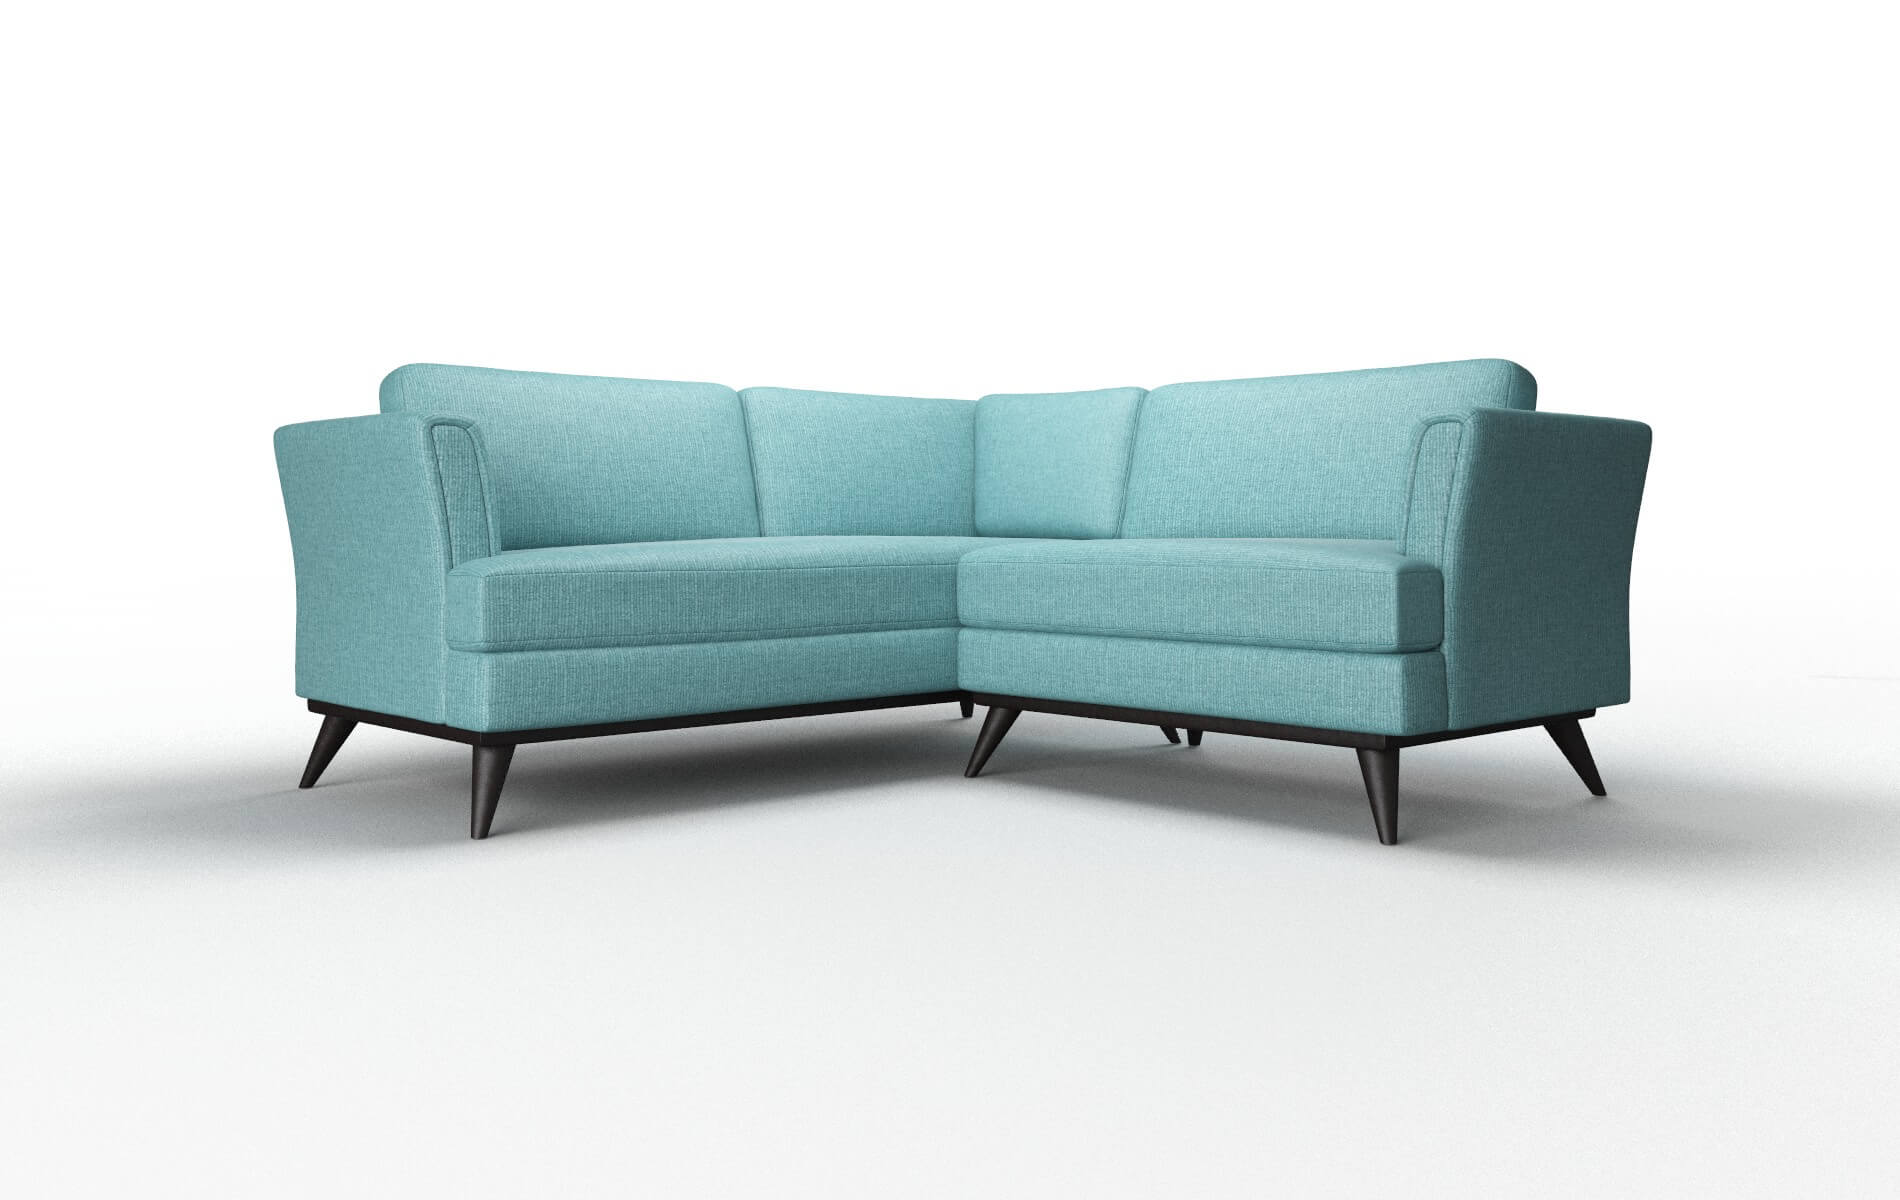 Antalya Parker Turquoise Sectional espresso legs